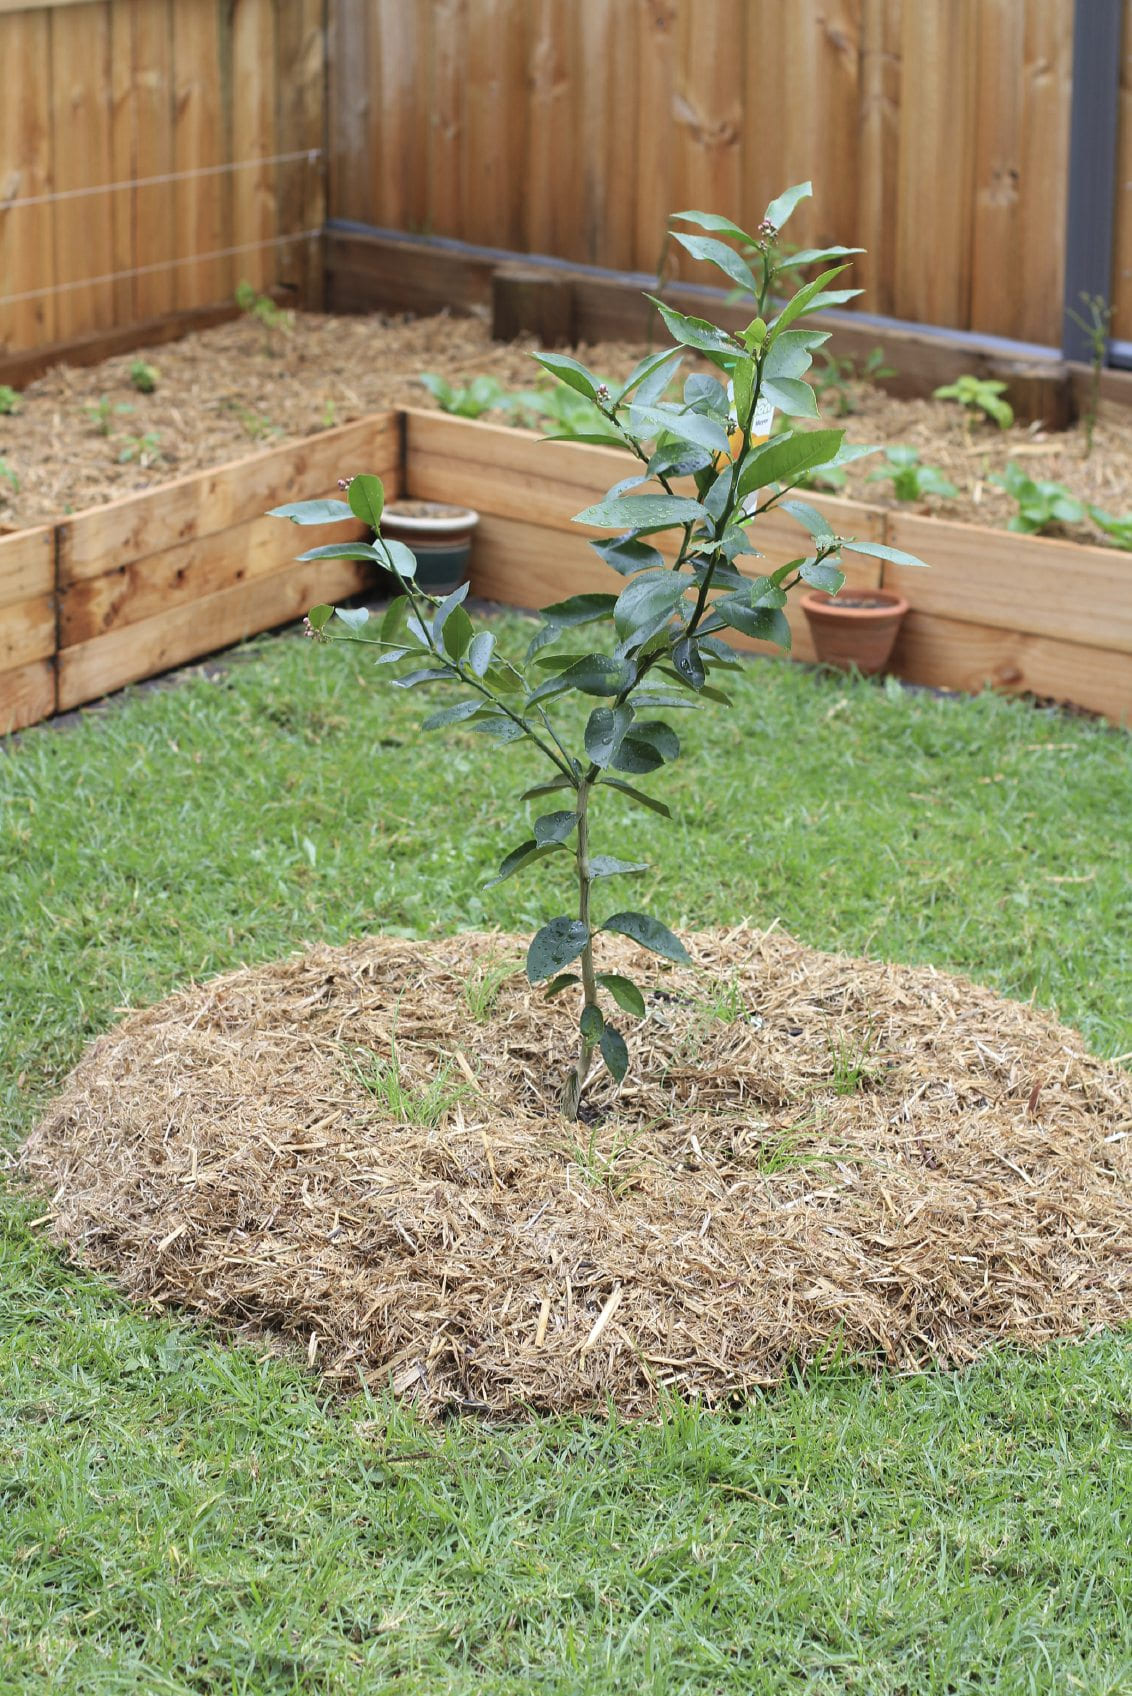 Simphome.com fruit trees in garden design ideas for planting fruit trees in the year 2020 2021 2022